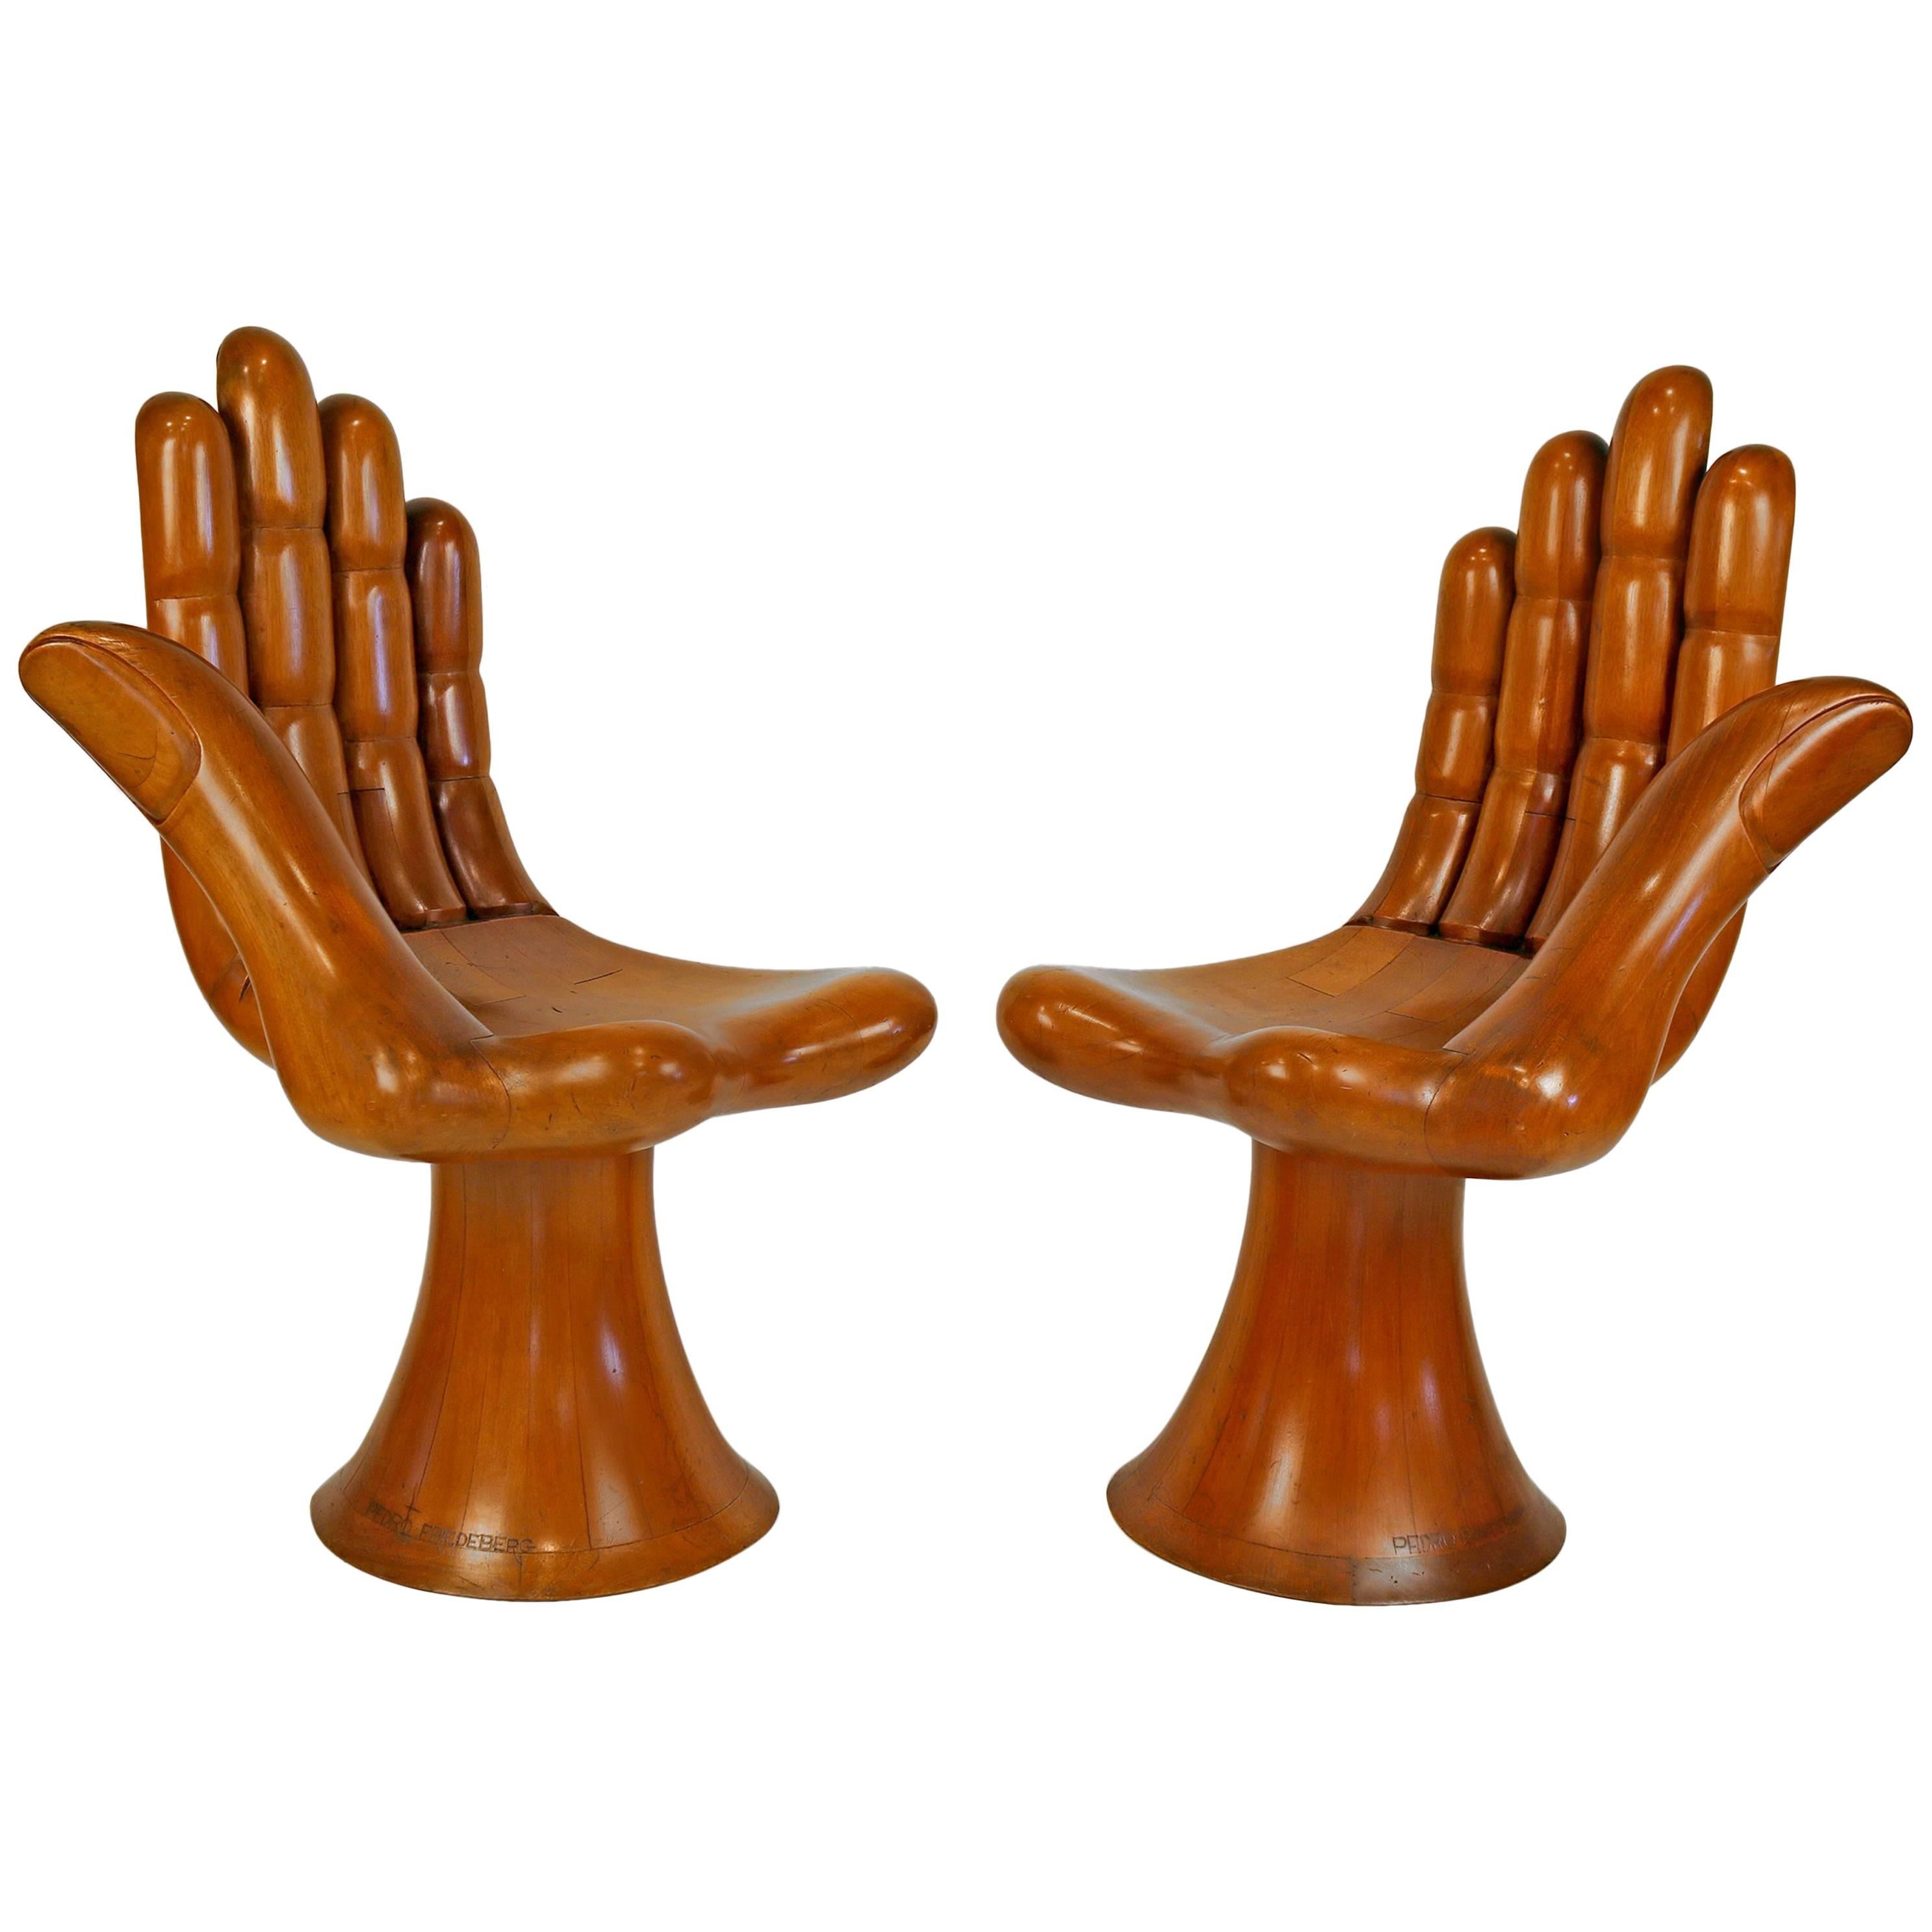 Pedro Friedeberg Natural Mahogany Right and Left Pair of Hand Chairs, Settee 